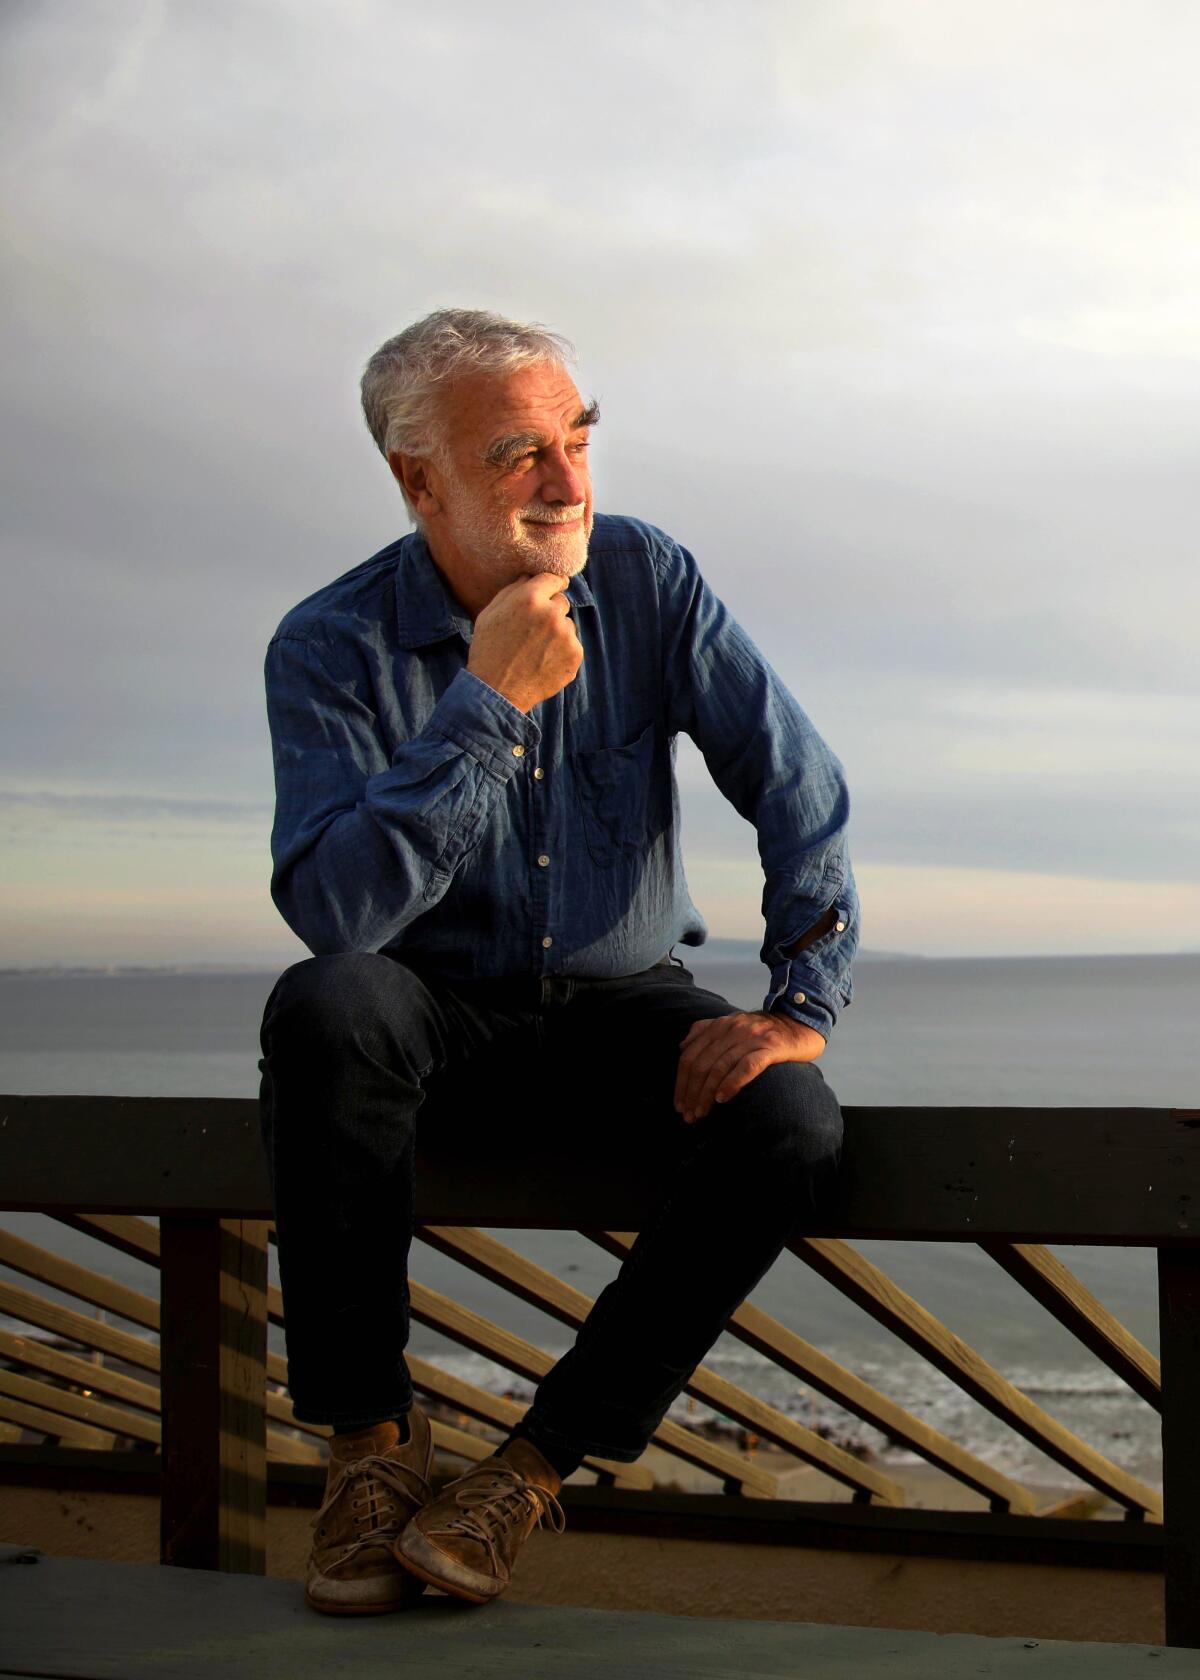 Luis Moreno Ocampo, lit by warm sunset light, sits on railing of a patio, looking to the right. Calm sea is behind.